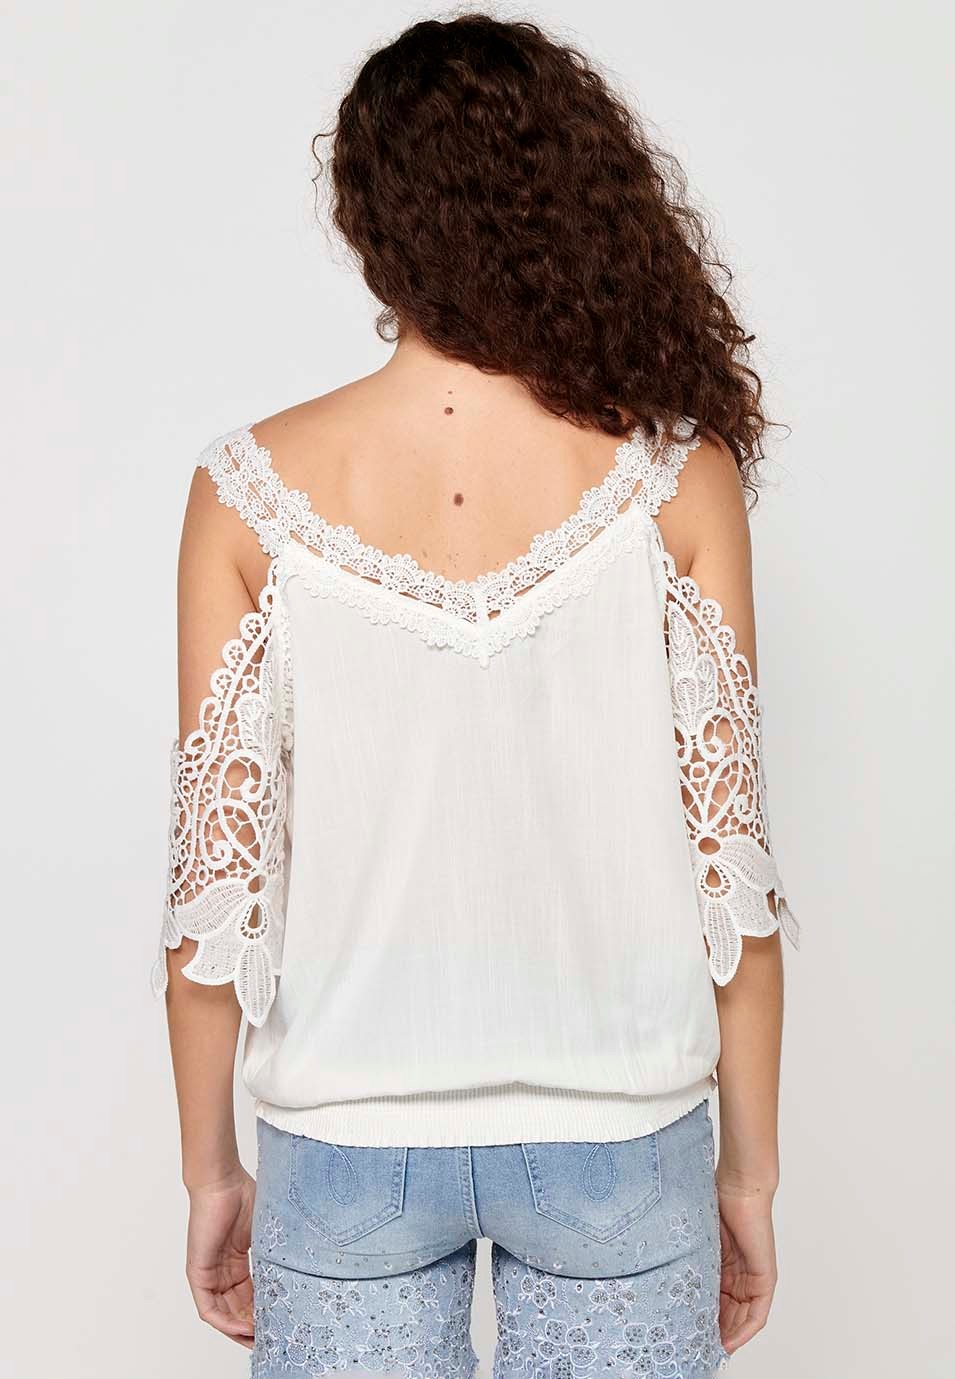 Short-sleeved lace blouse with V-neckline and elasticated waist in White for Women 5